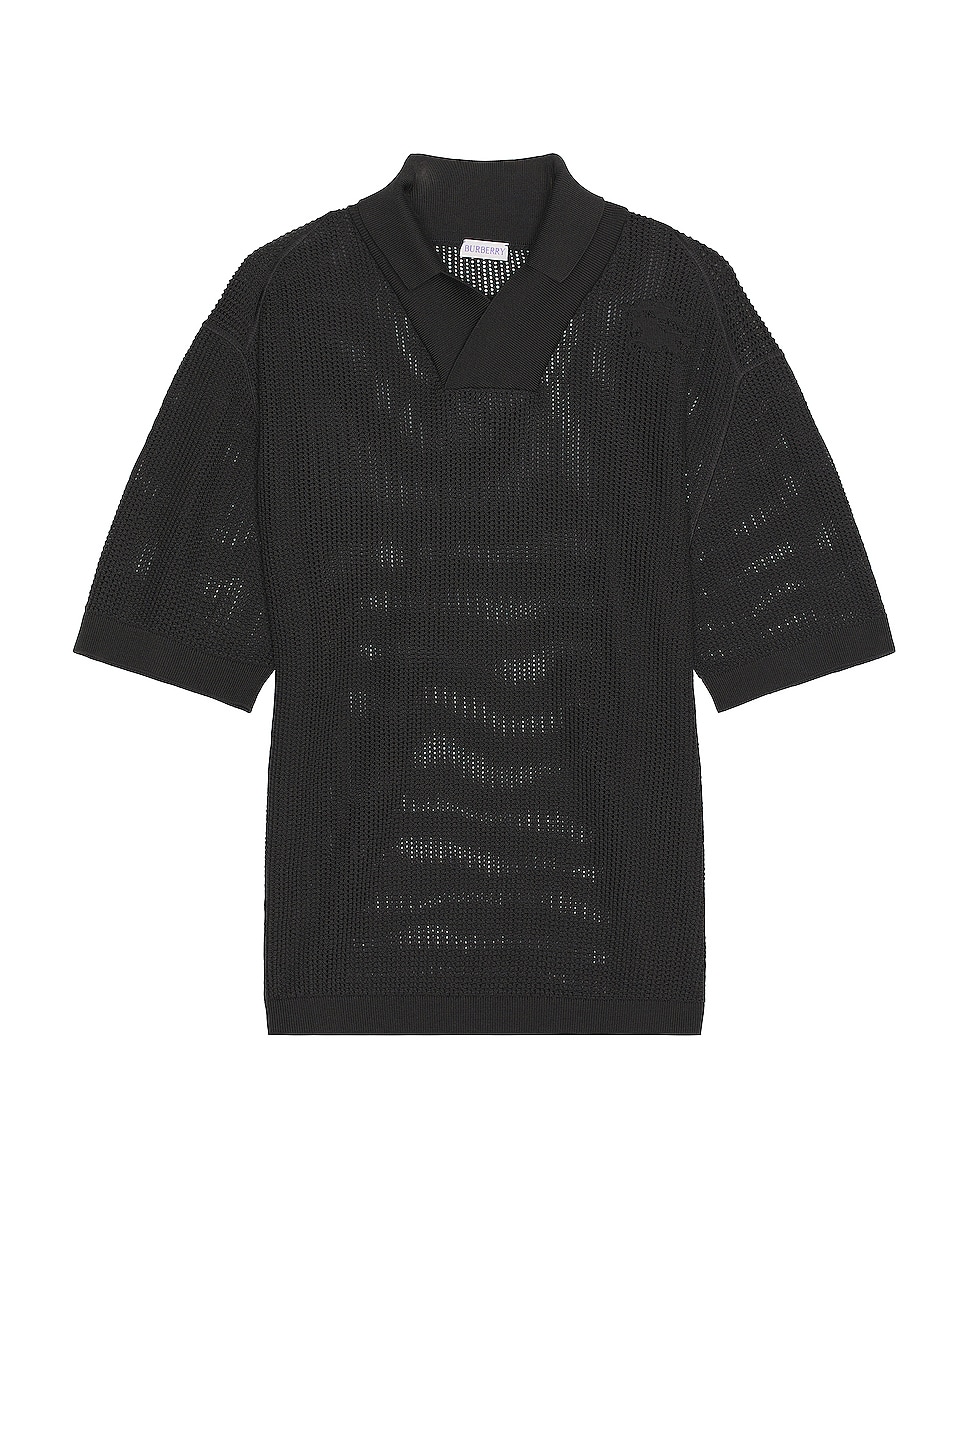 Image 1 of Burberry Short Sleeve Shirt in Onyx